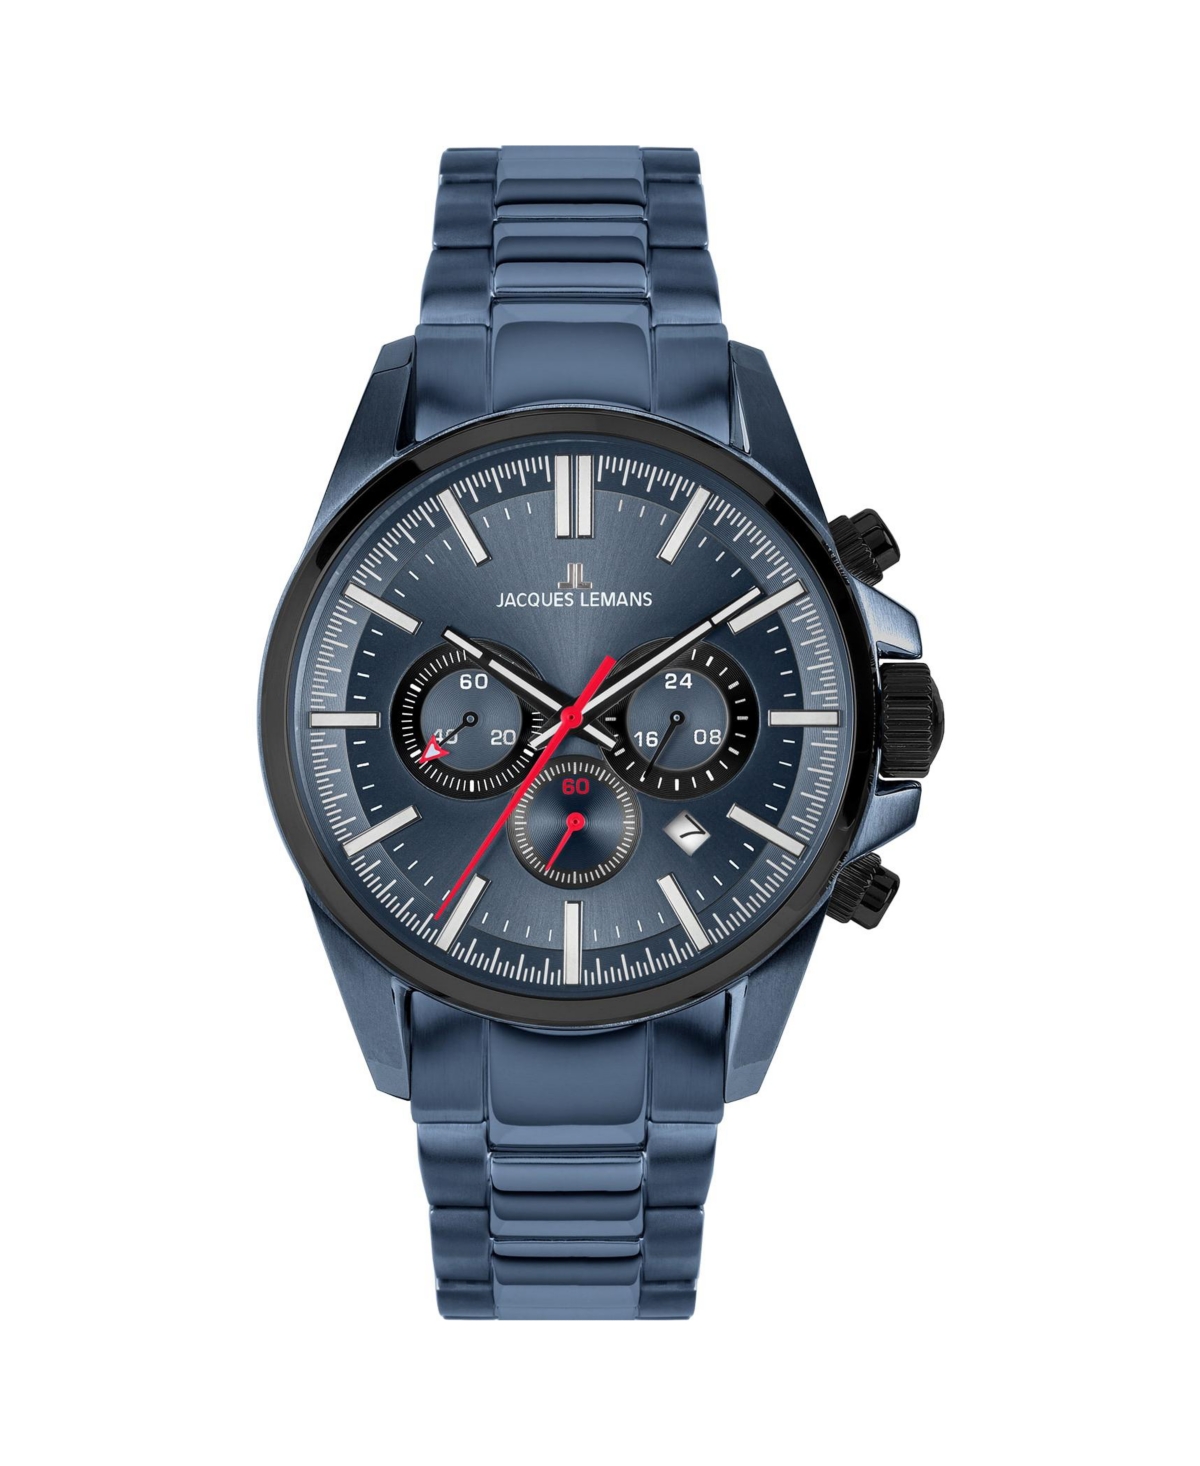 Men's Liverpool Watch with Solid Stainless Steel Strap, Ip-Blue/Ip-Black Bicolor Chronograph, 1-2119 - Medium blue